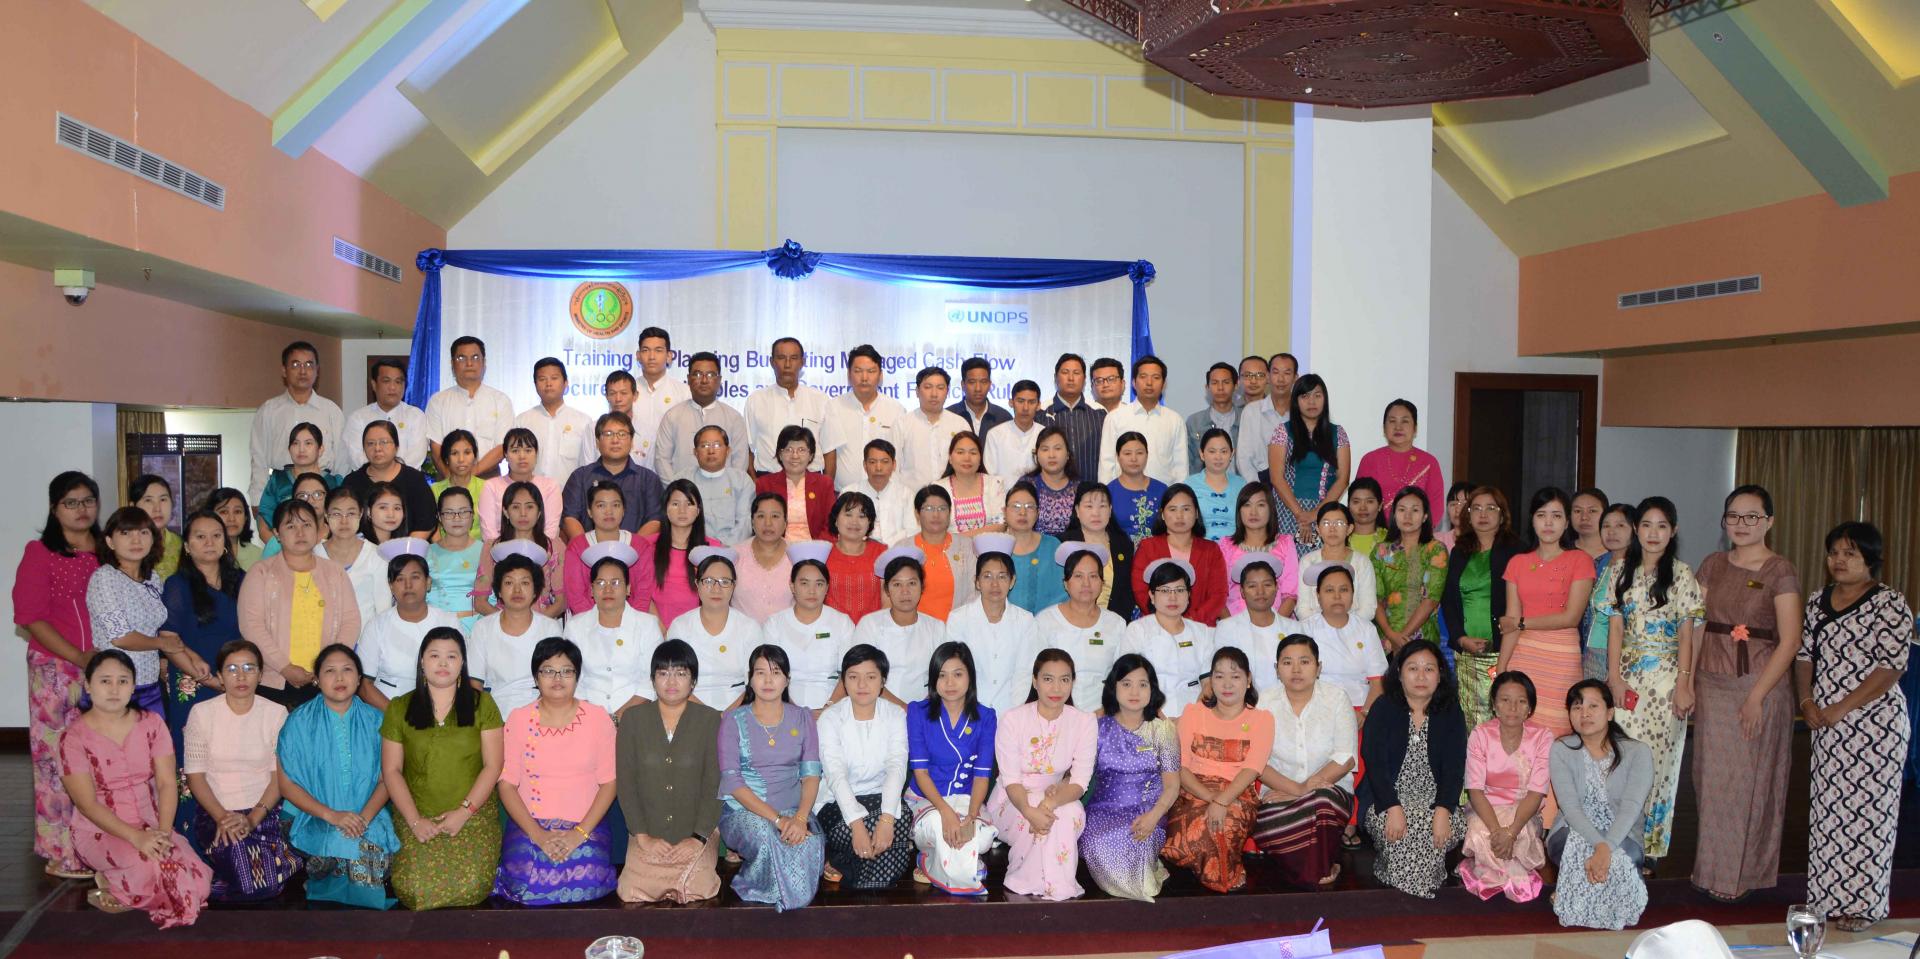 MOHS Yangon Regional Health Director Dr Tun Myint, together with participating government health staff and UNOPS-PR staff, at the last batch of the training, Yangon. Photo: UNOPS